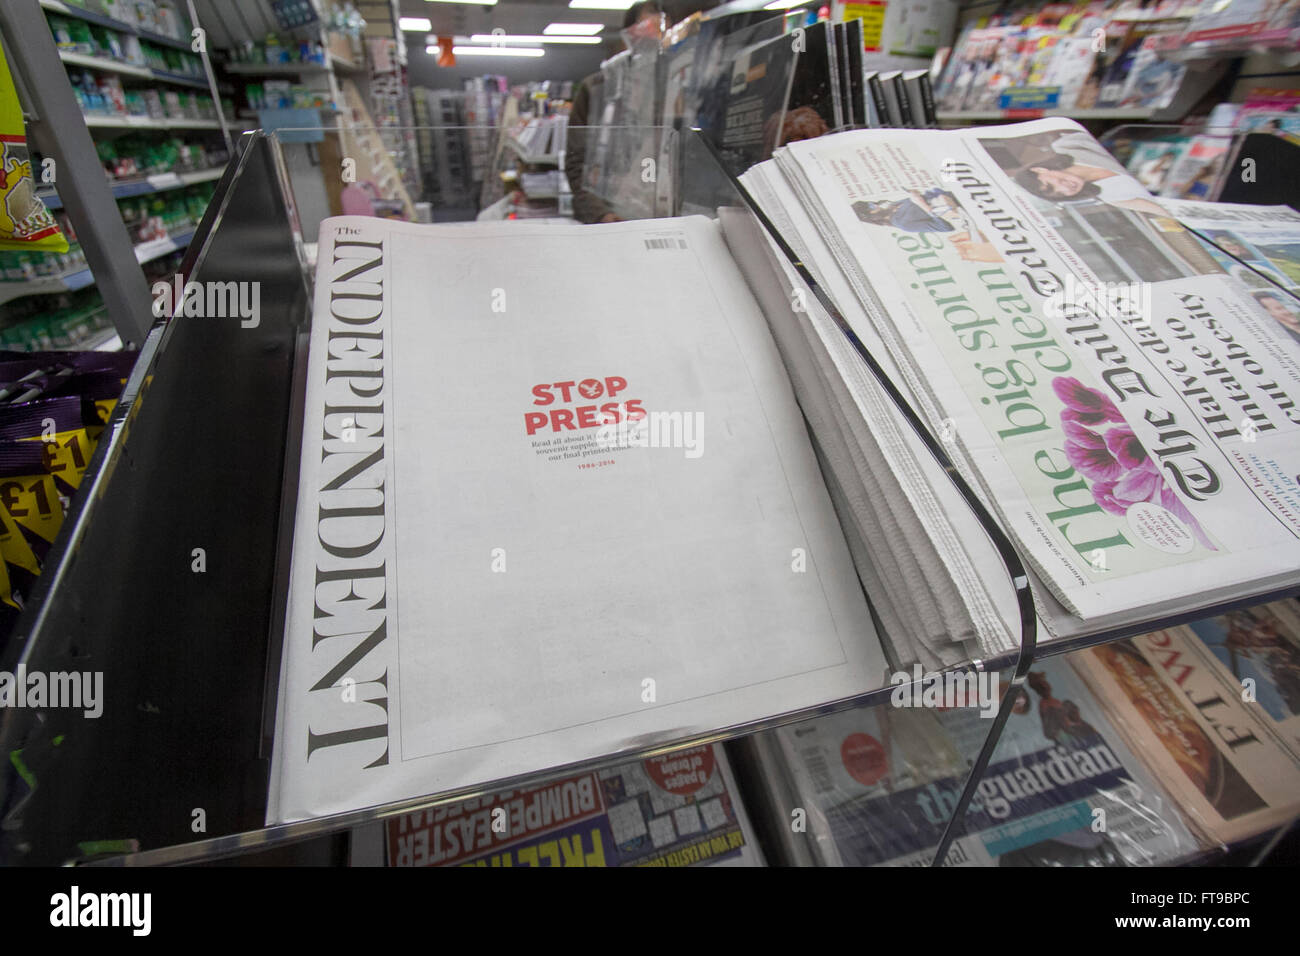 London, UK. 26th March 2016. A newsagent holds The final print edition of the British newspaper 'The Independent' which has been in circulation since 1986. The paper will now be available in a 'digital platform only' © amer ghazzal/Alamy Live News Credit:  amer ghazzal/Alamy Live News Stock Photo